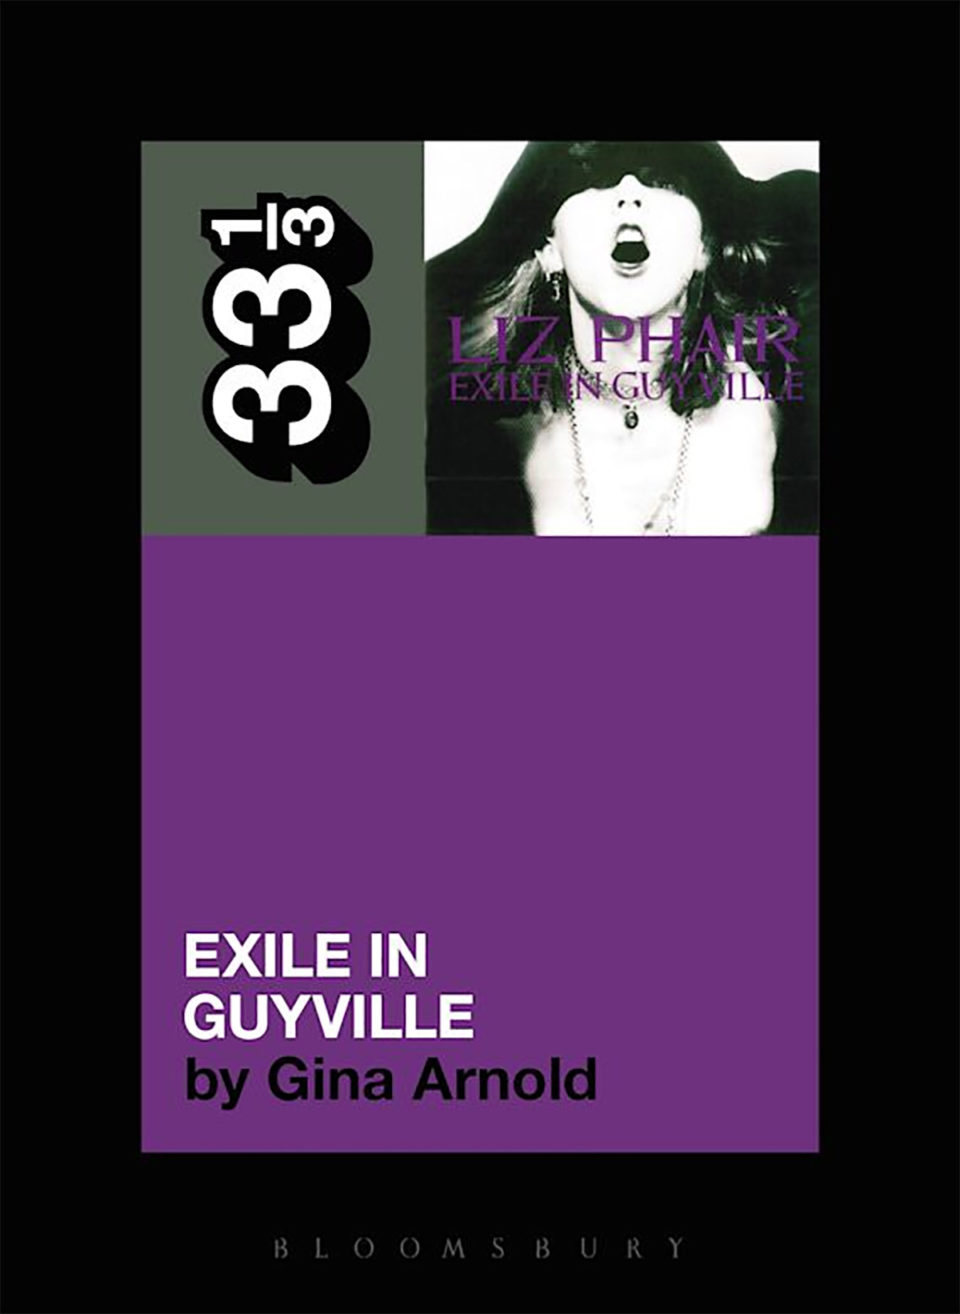 Liz Phair's Exile in Guyville by Gina Arnold